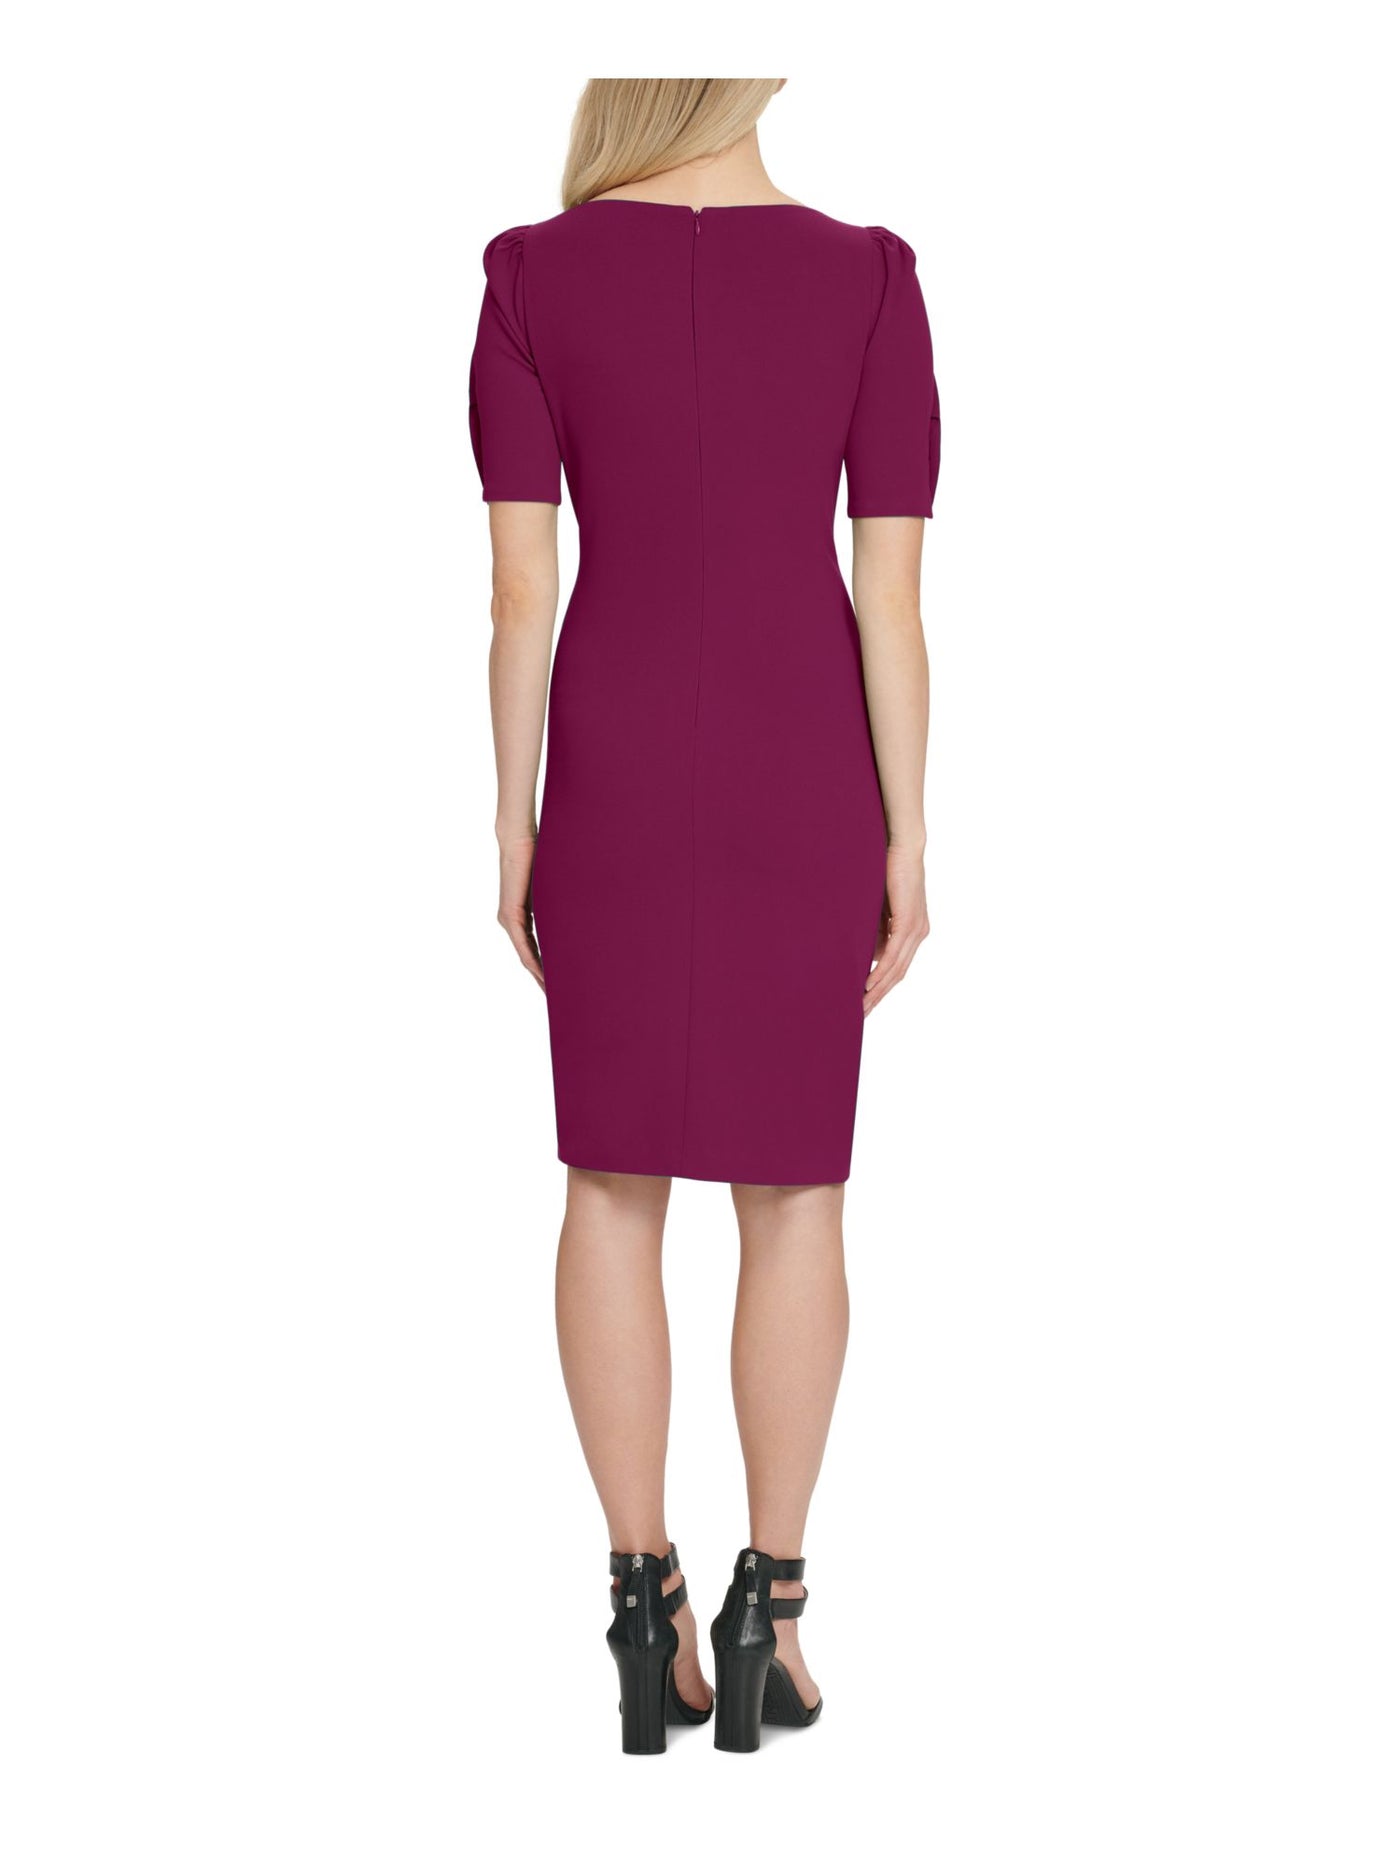 DKNY Womens Purple Ruched Faux Buttons At Sleeve Short Sleeve Jewel Neck Above The Knee Wear To Work Sheath Dress 8